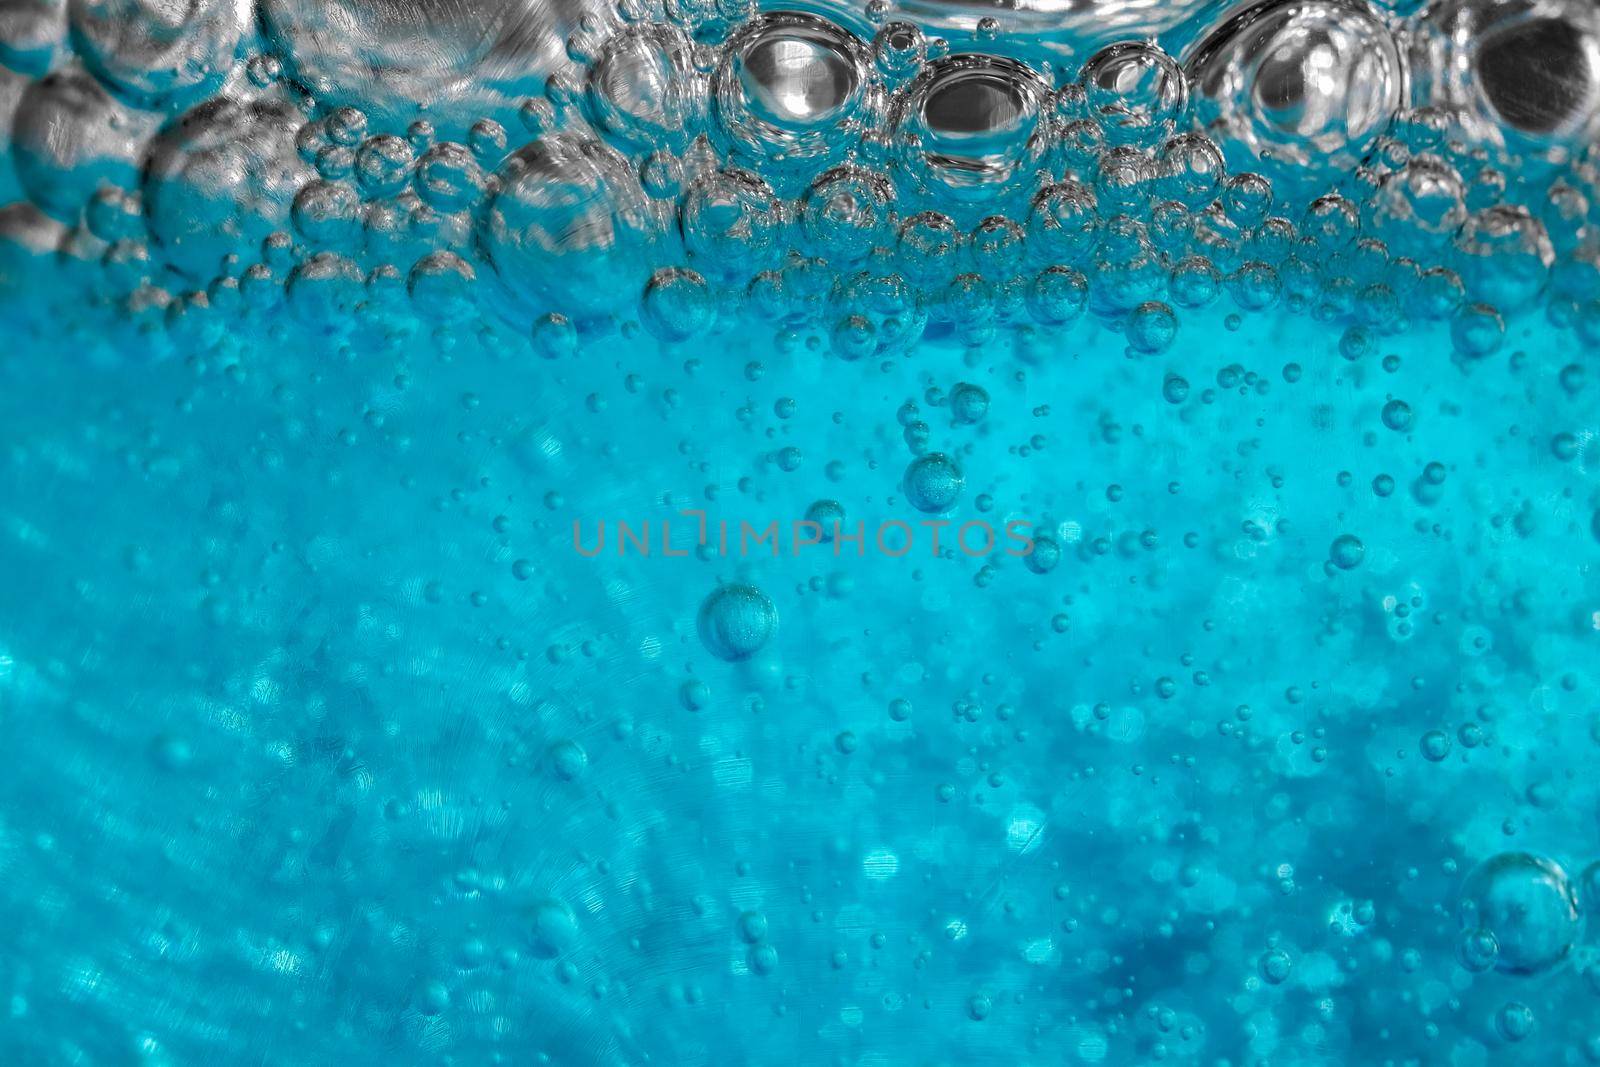 air bubbles in blue shampoos as background by roman112007